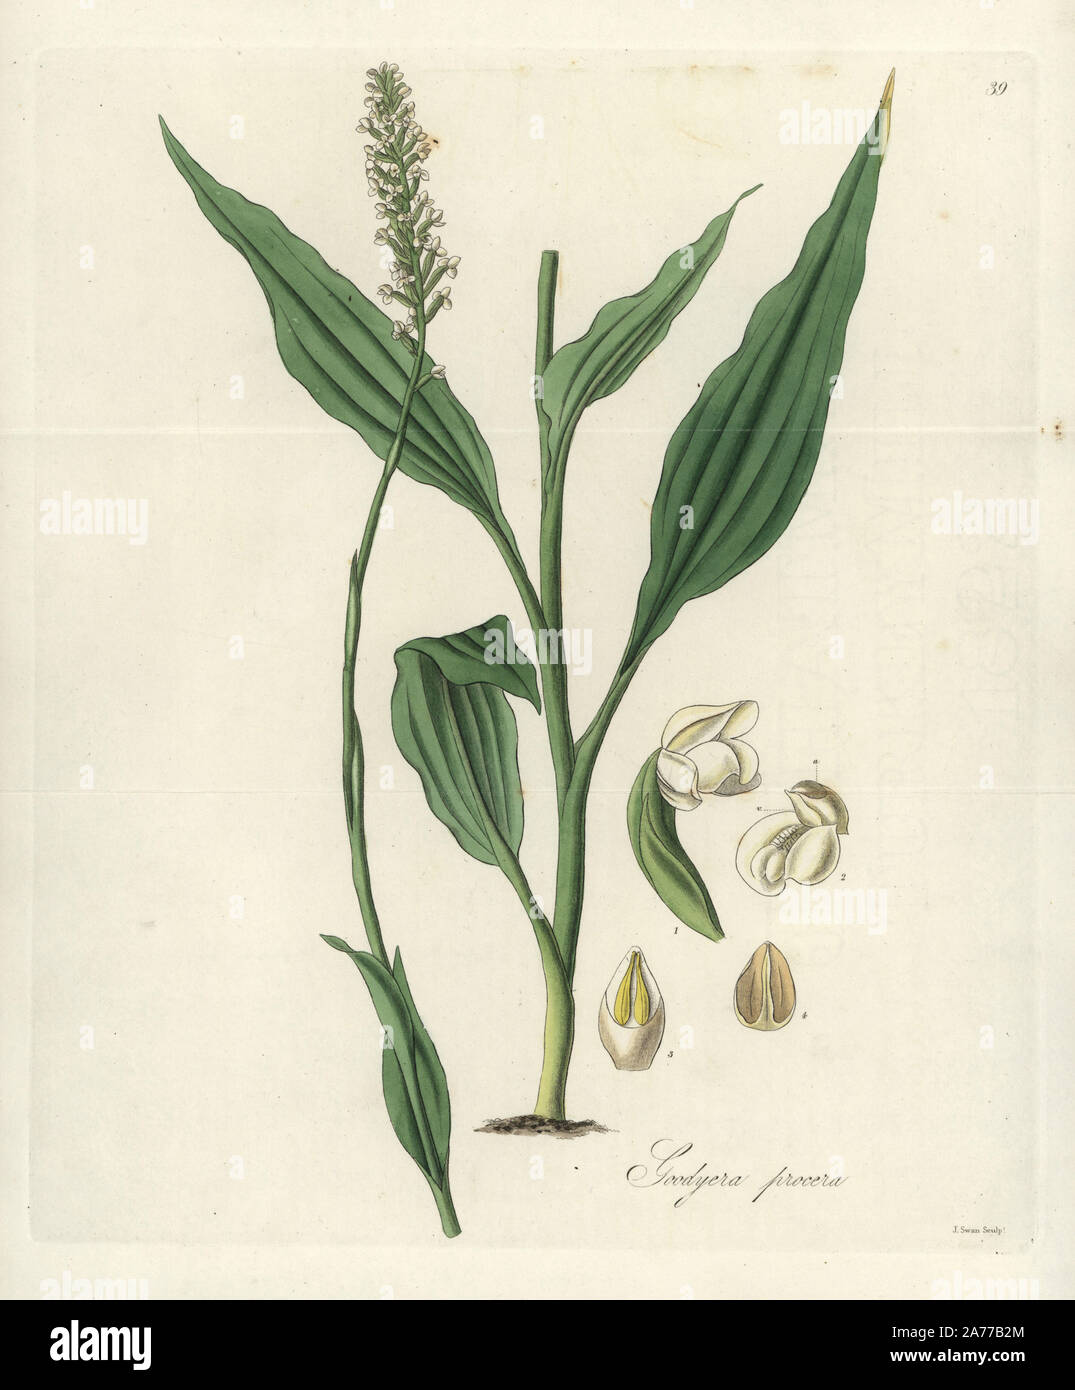 Tall goodyera orchid, Goodyera procera. Handcoloured copperplate engraving by J. Swan after a botanical illustration by William Jackson Hooker from his own 'Exotic Flora,' Blackwood, Edinburgh, 1823. Hooker (1785-1865) was an English botanist who specialized in orchids and ferns, and was director of the Royal Botanical Gardens at Kew from 1841. Stock Photo